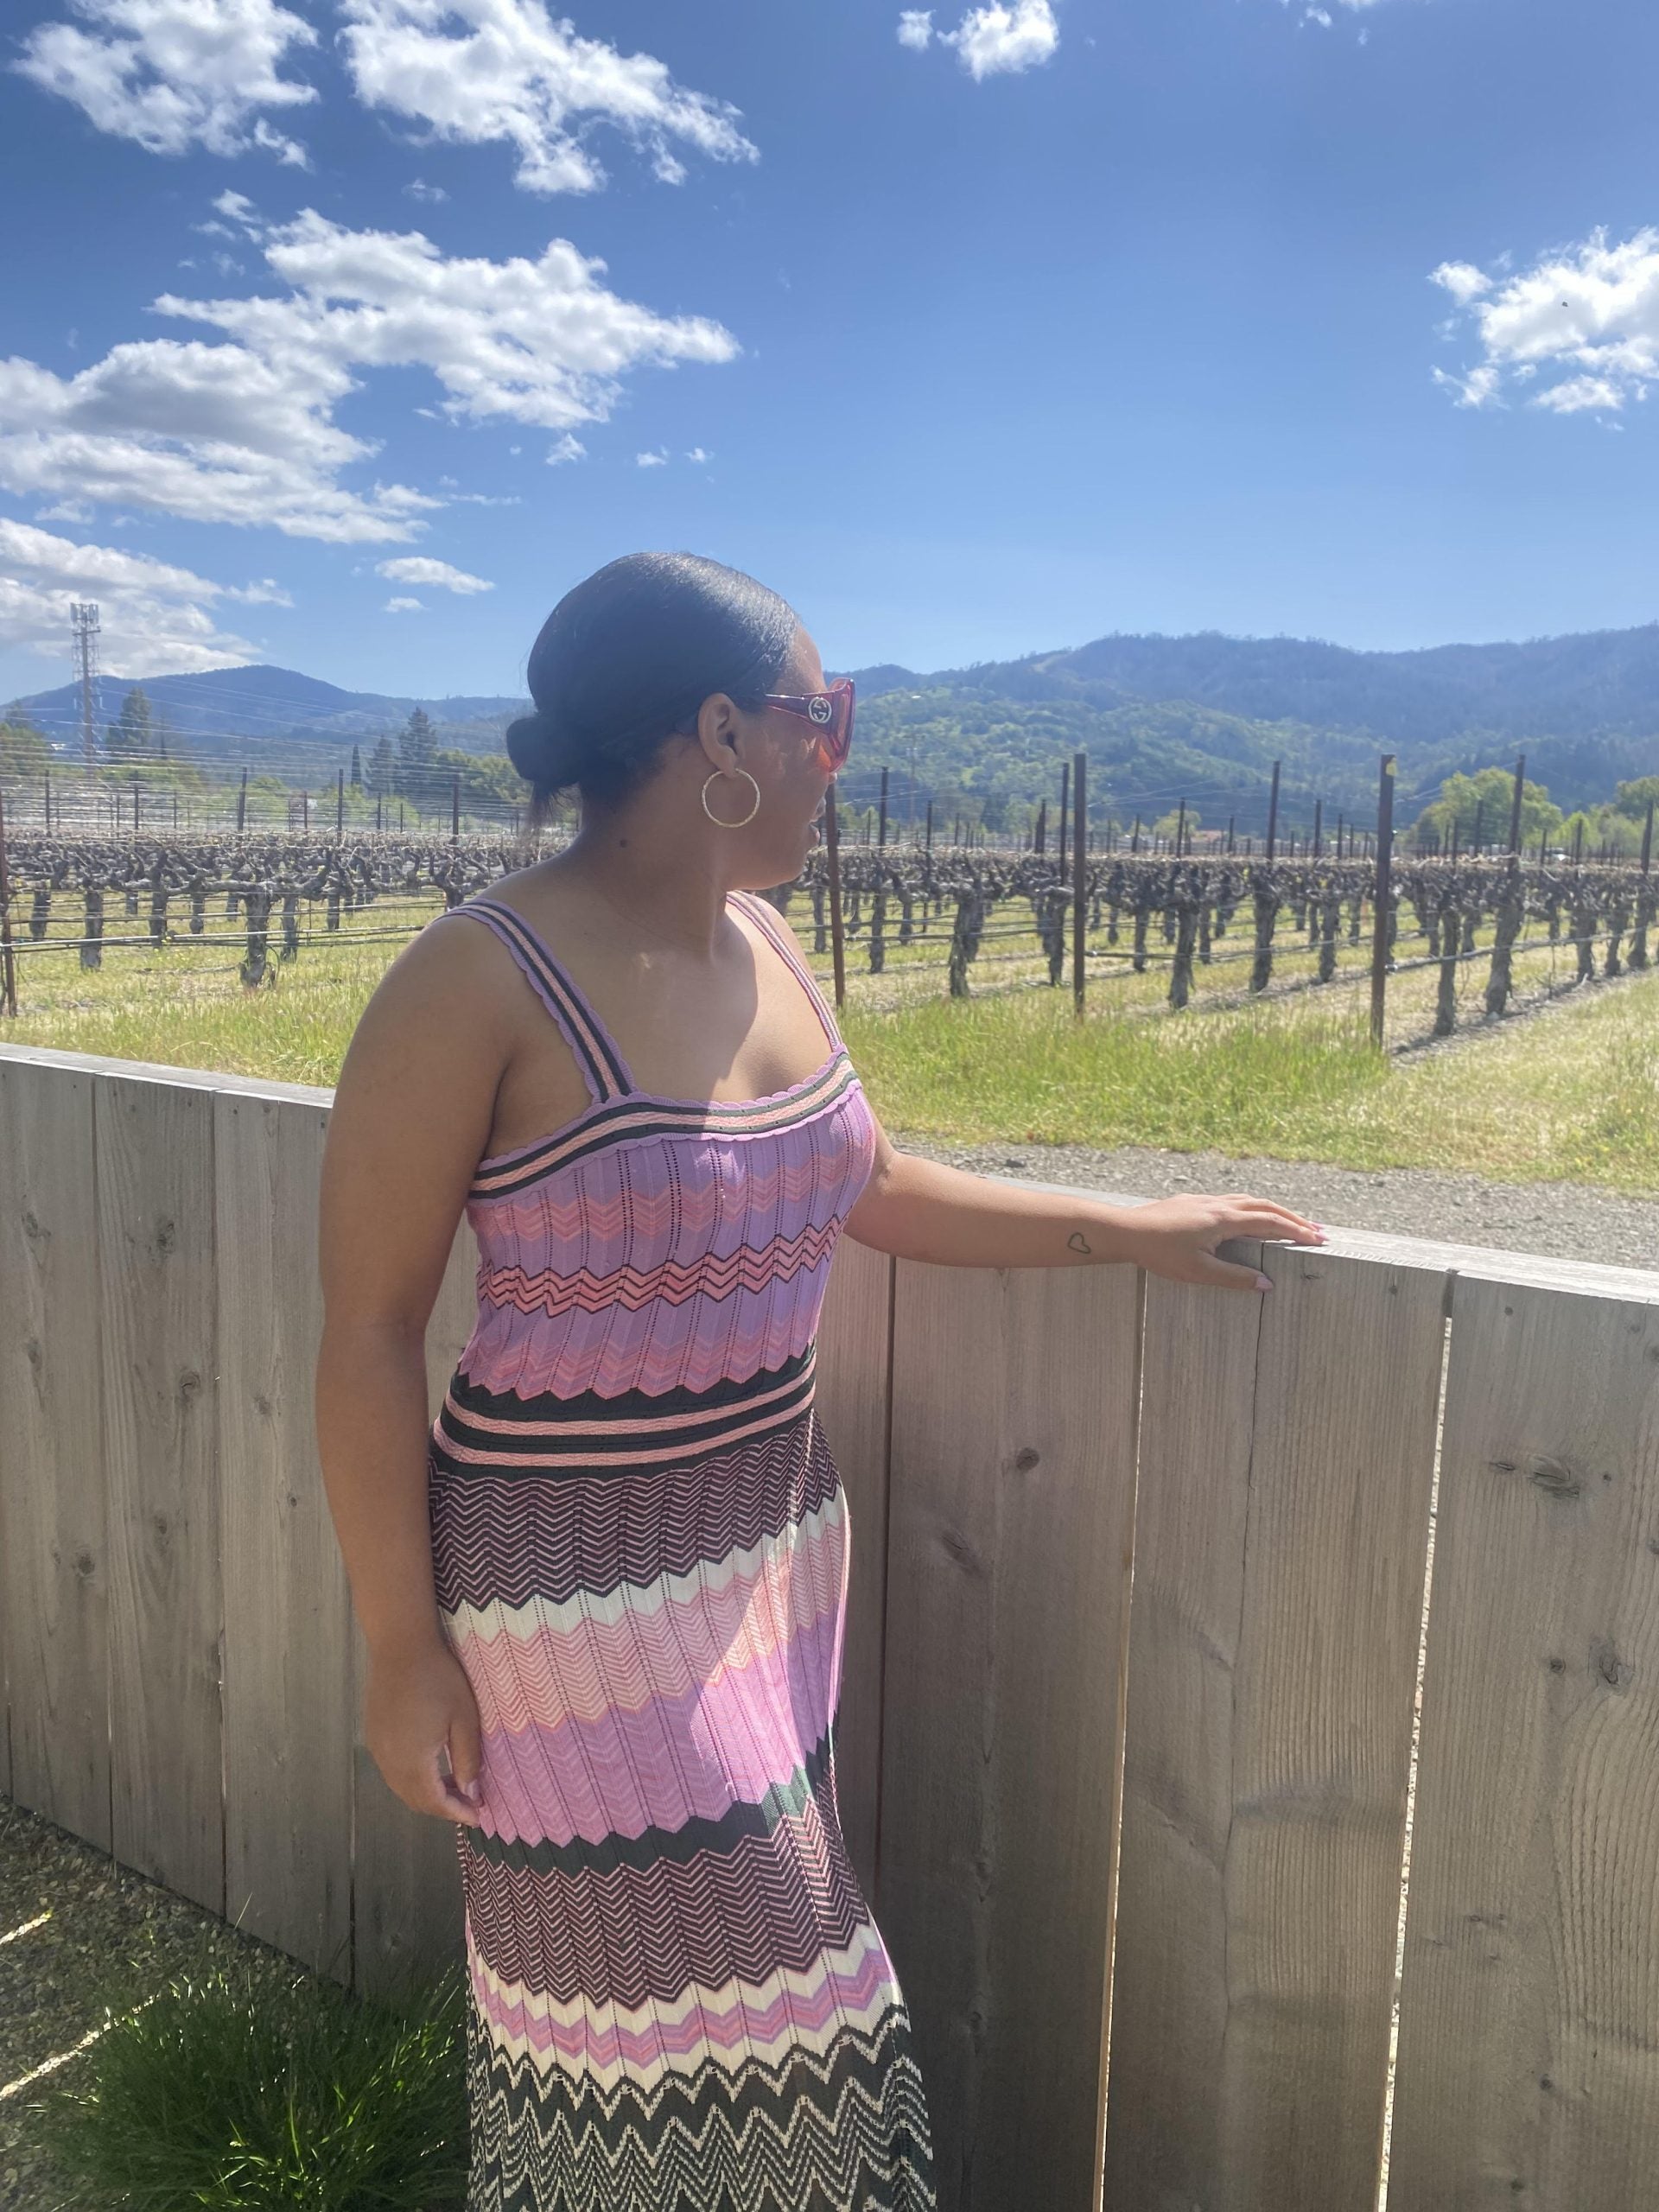 Living Well: I Traveled To Calistoga For Wellness Week At Dr. Wilkinson’s Backyard Resort & Mineral Springs